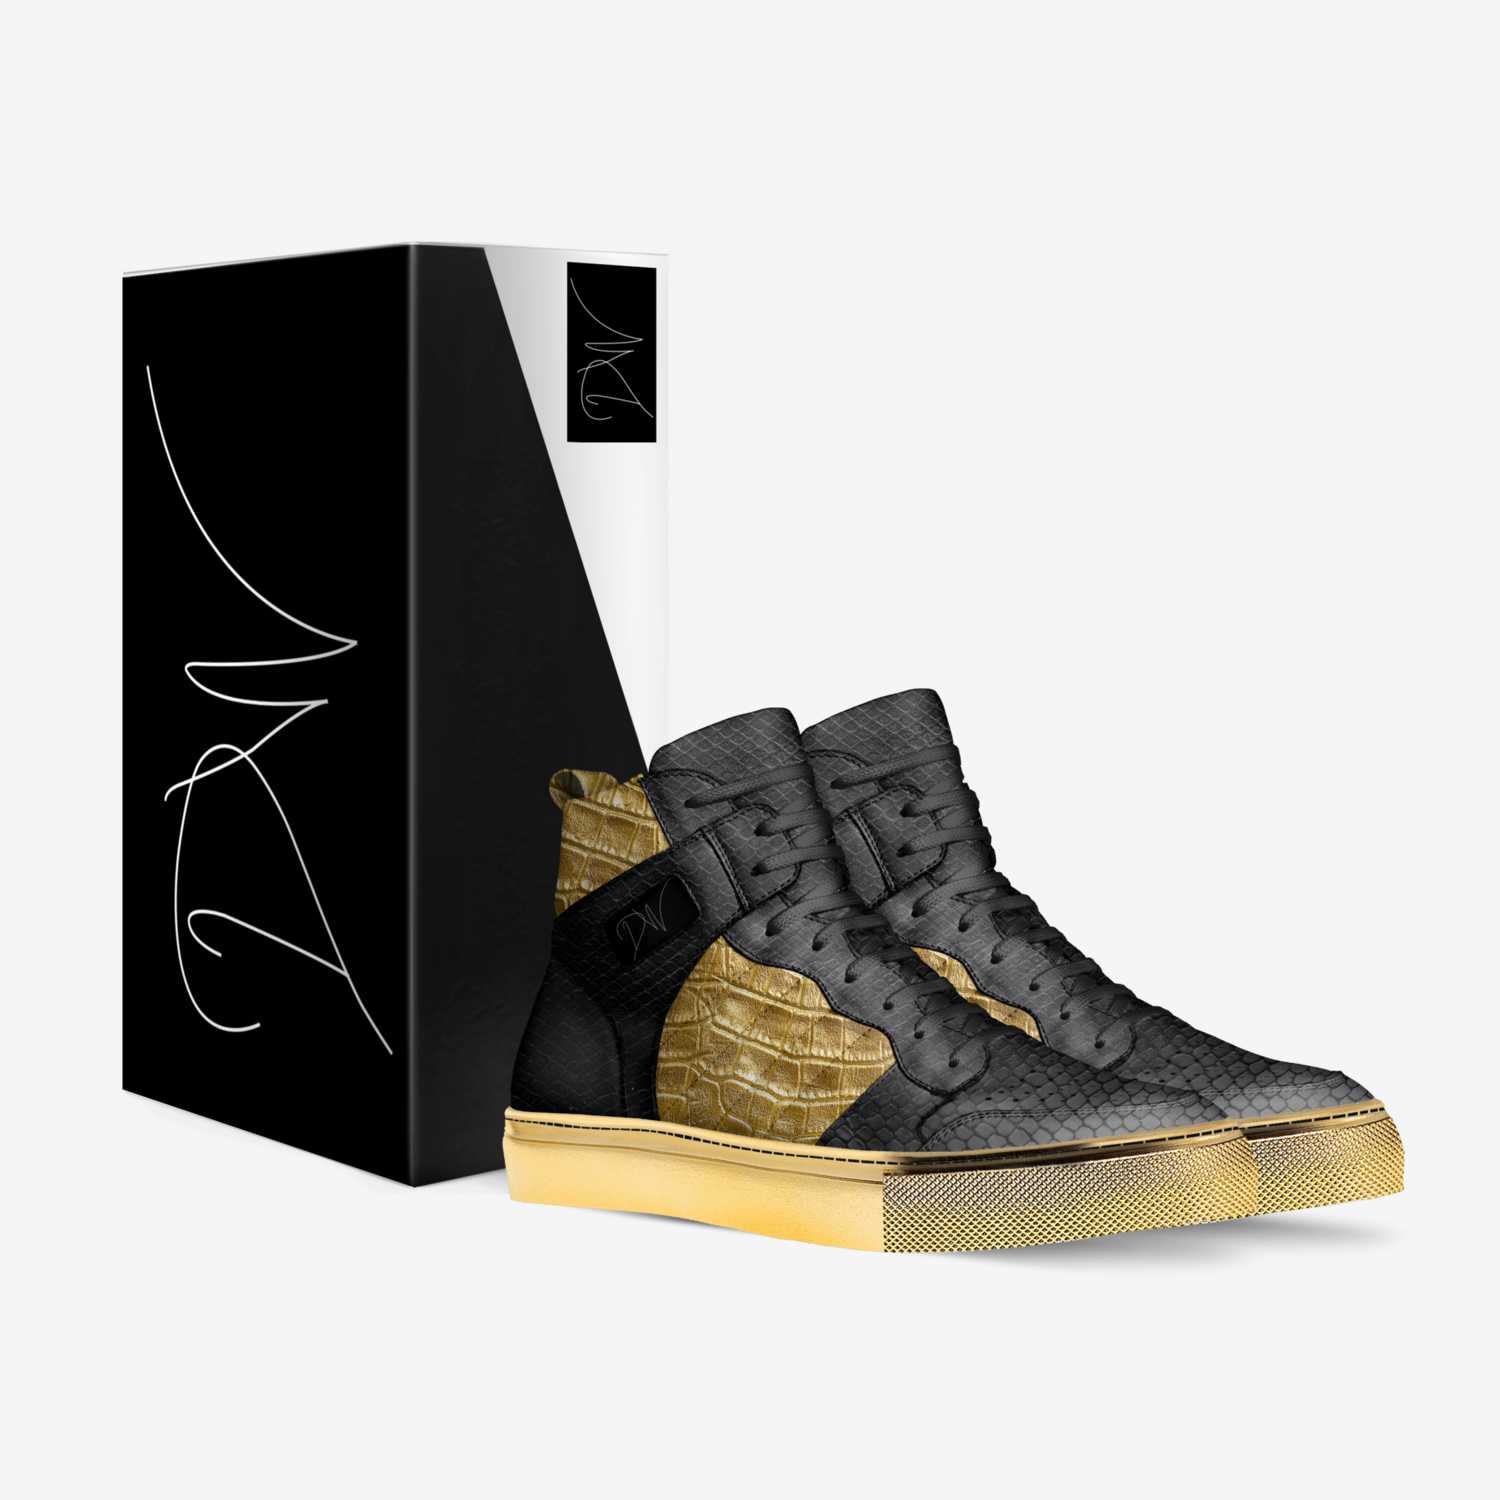 DW custom made in Italy shoes by Davion Wells | Box view